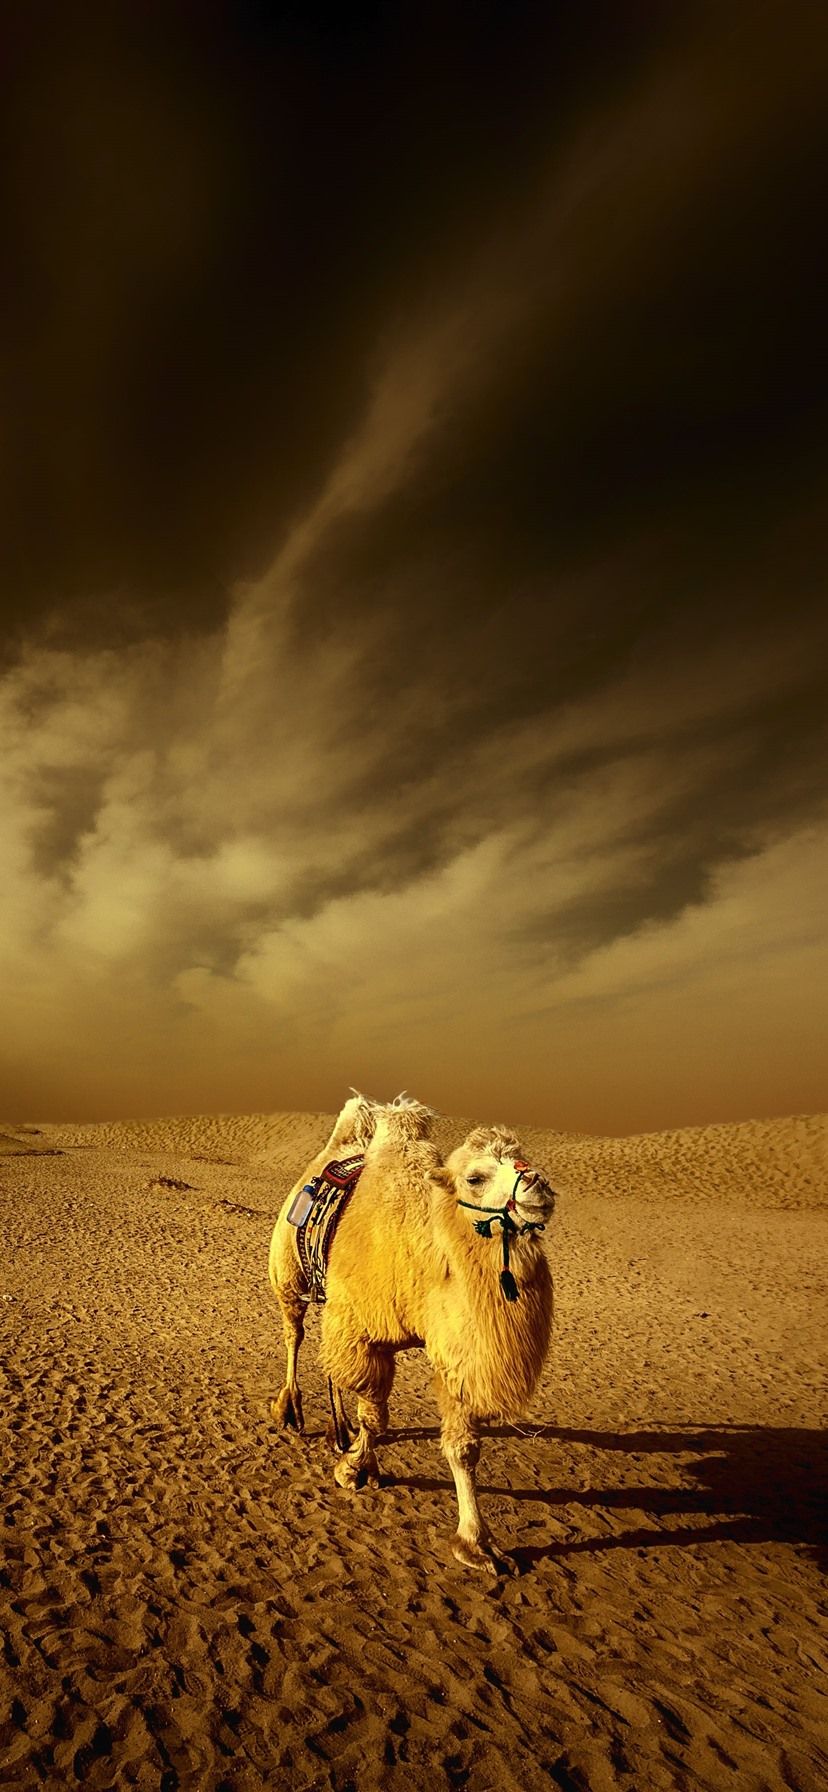 Desert, Camel, Clouds, Dusk 1242x2688 IPhone 11 Pro XS Max Wallpaper, Background, Picture, Image